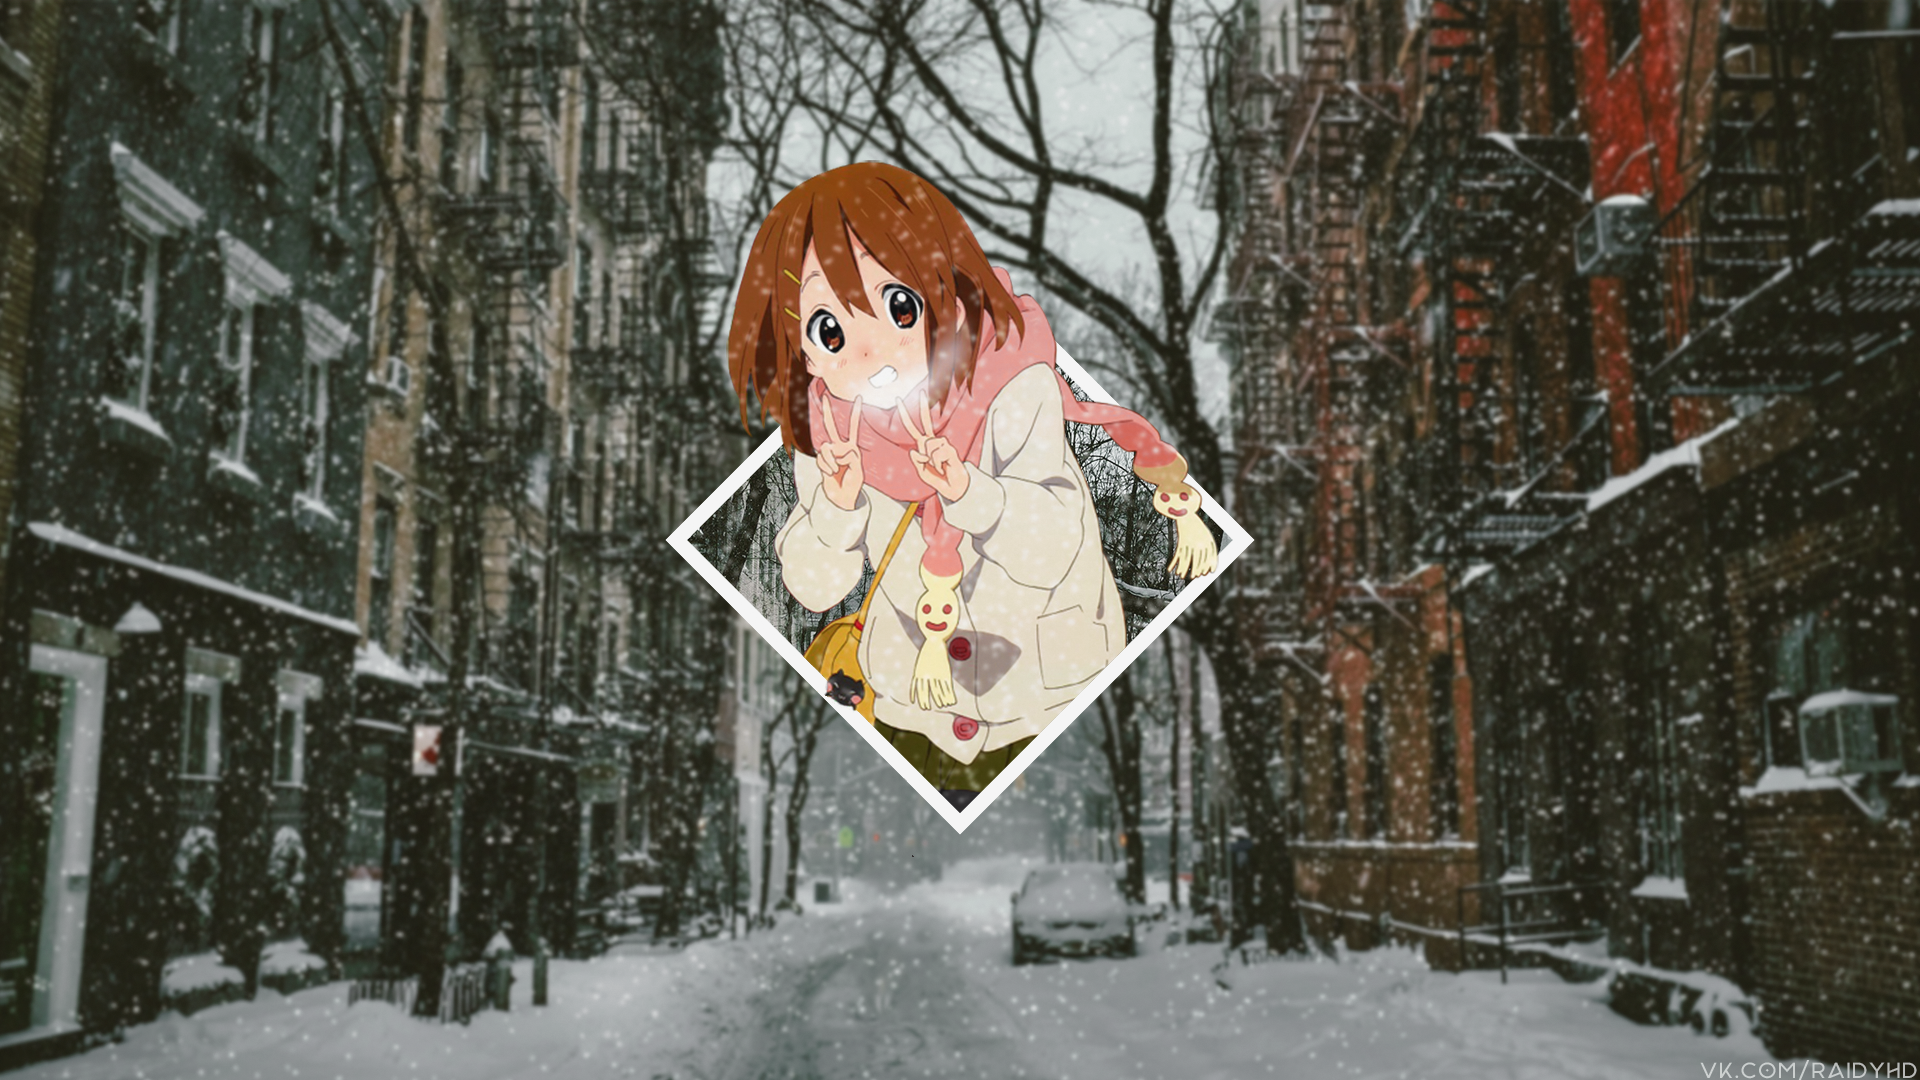 Anime 1920x1080 anime anime girls picture-in-picture K-ON! Hirasawa Yui